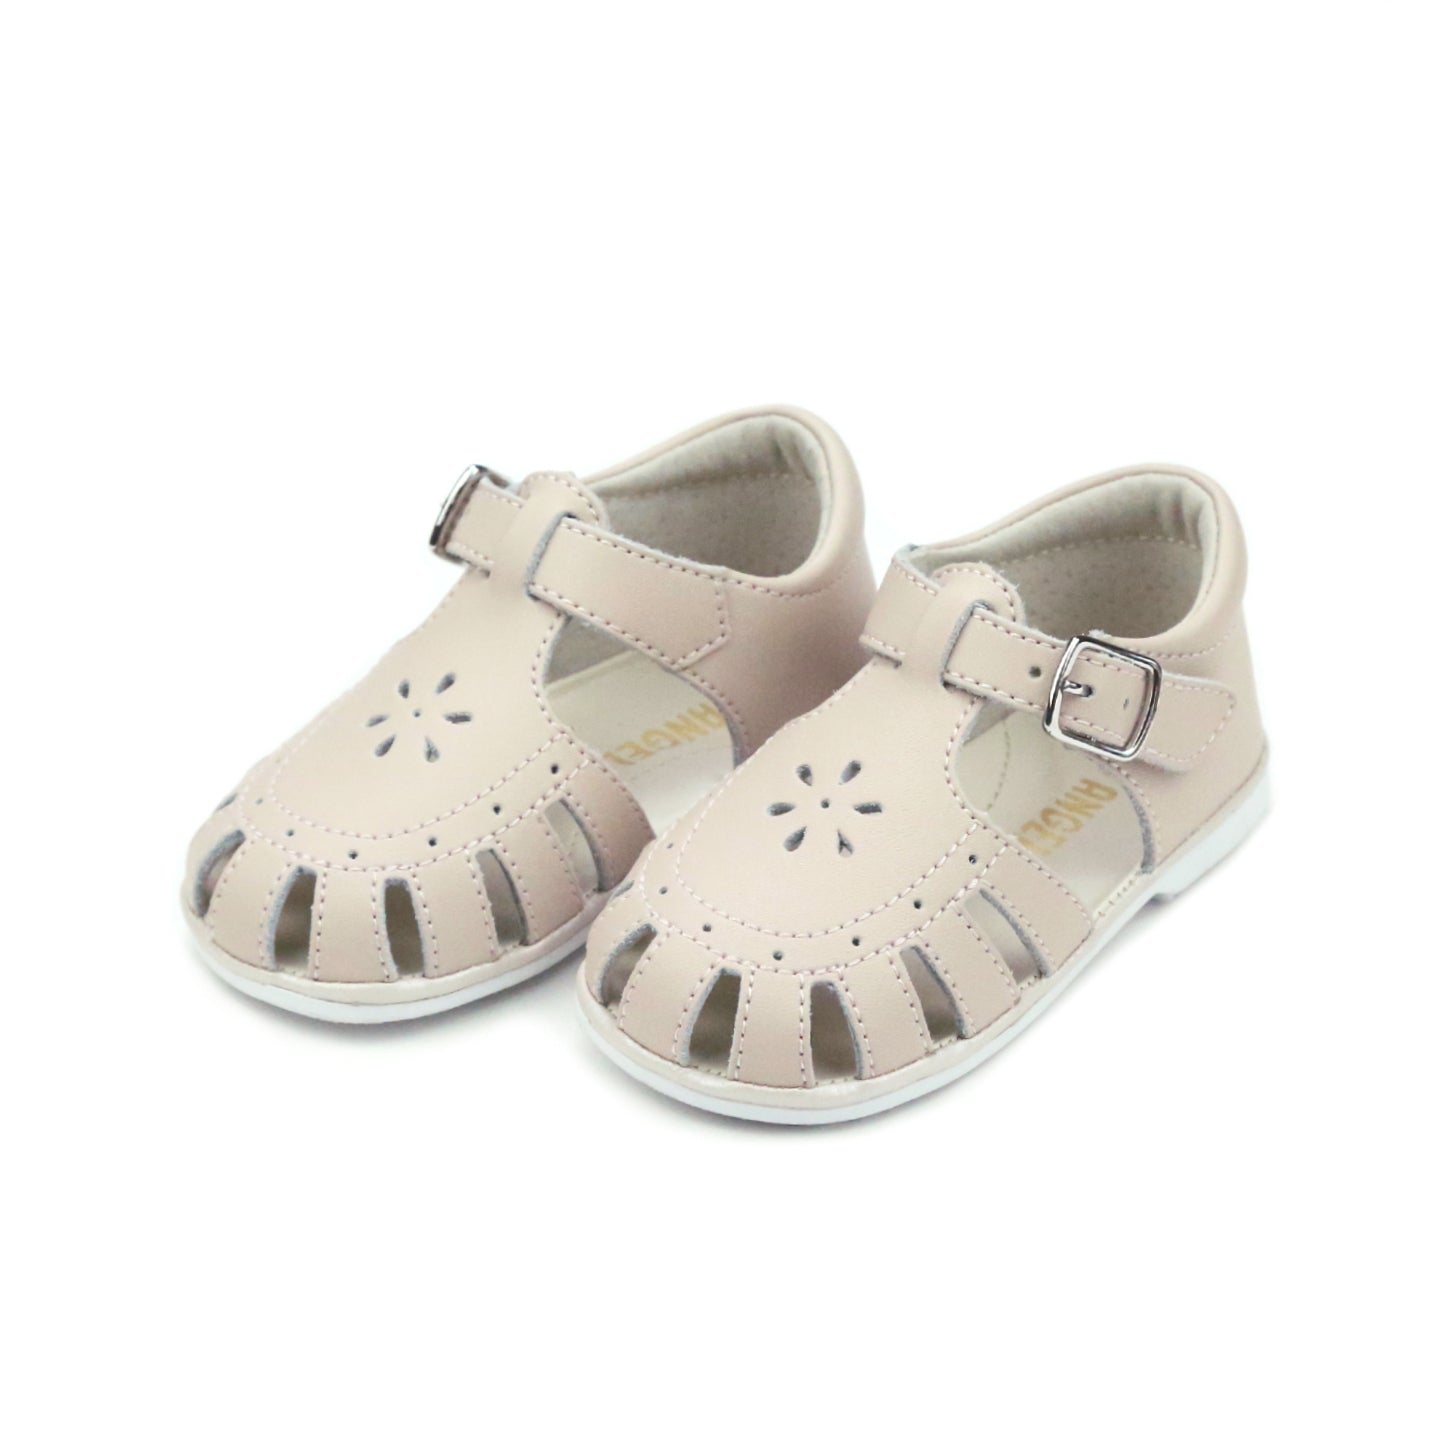 Shelby Caged Sandal - Babies & Toddlers